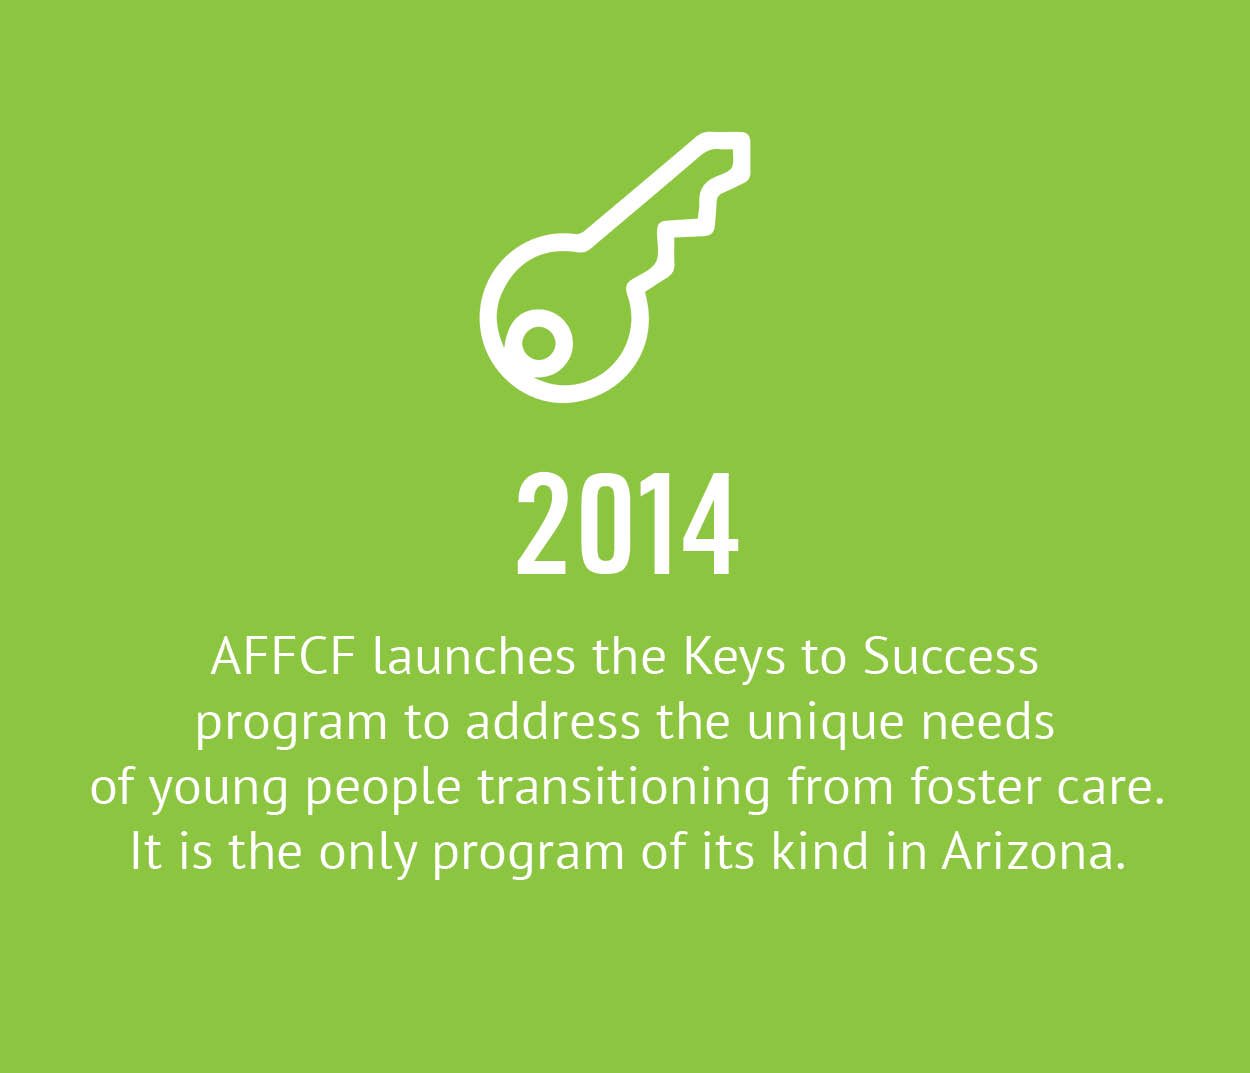 2014 - AFFCF launches the Keys to Success program to address the unique needs of young people transitioning from foster care. It is the only program of its kind in Arizona.